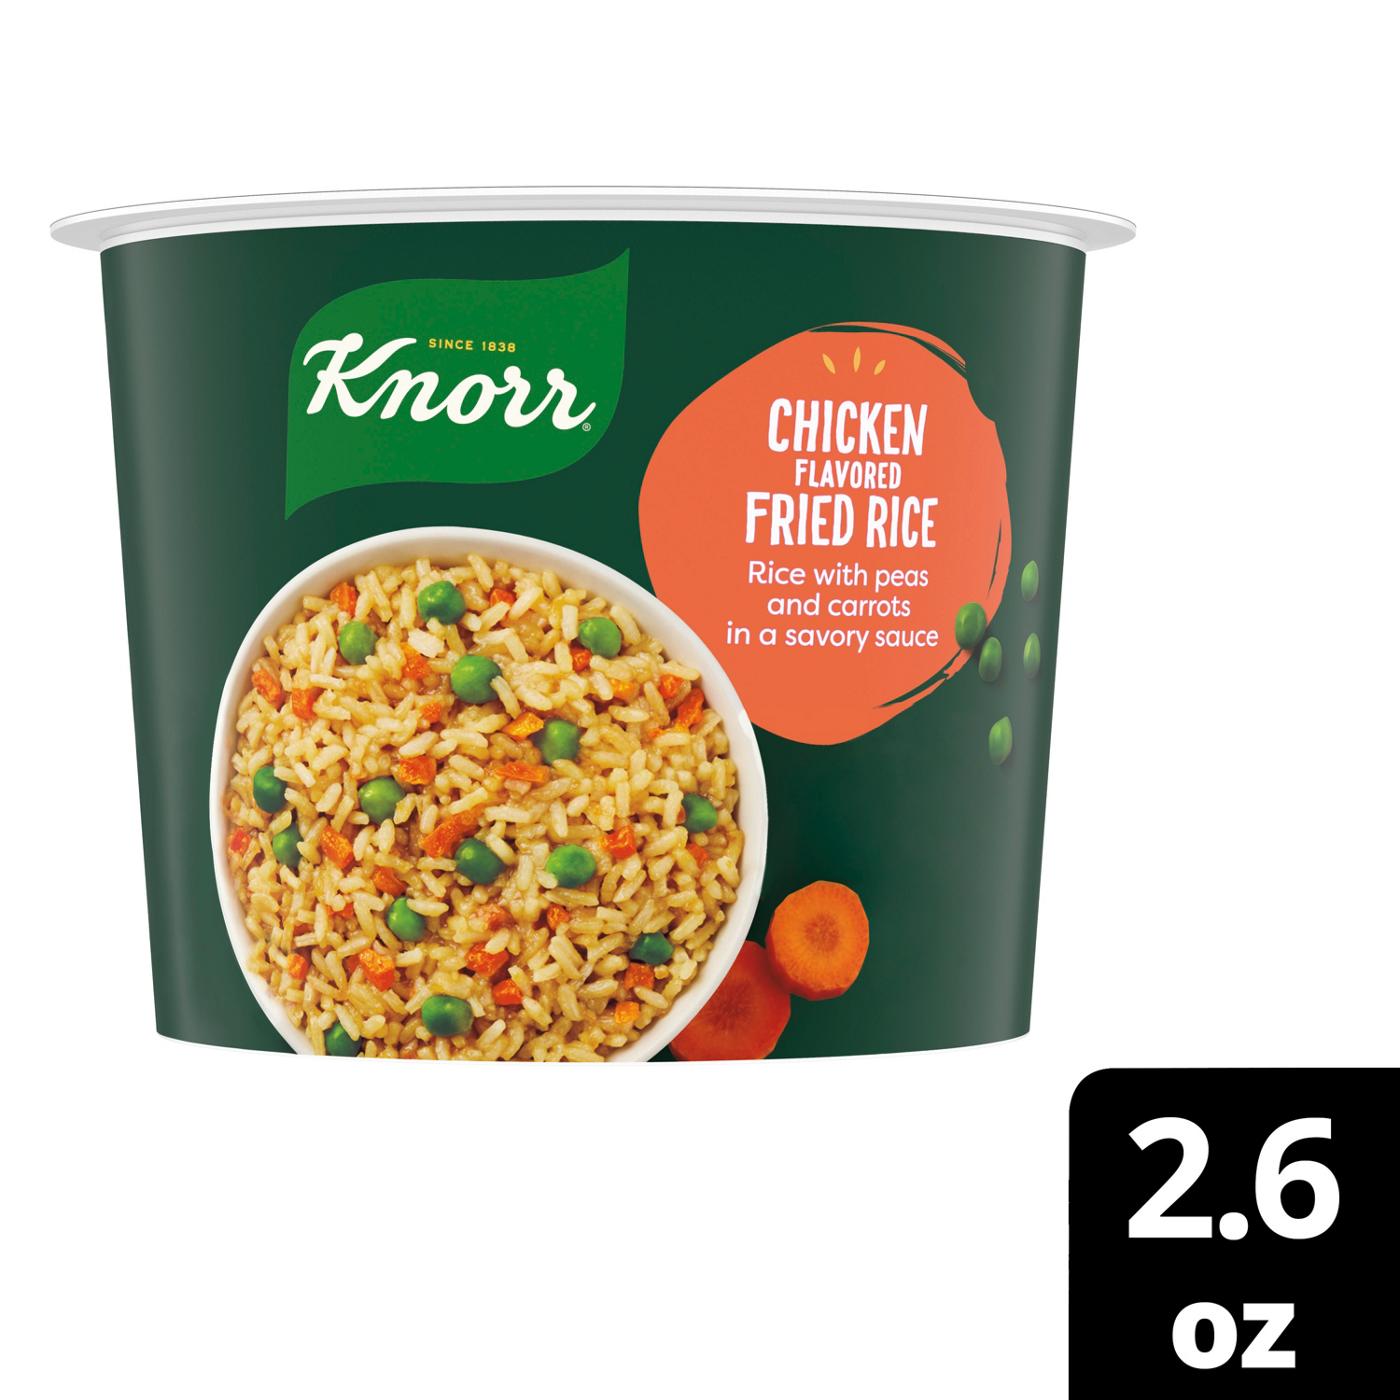 Knorr Chicken Fried Rice Cup; image 5 of 6